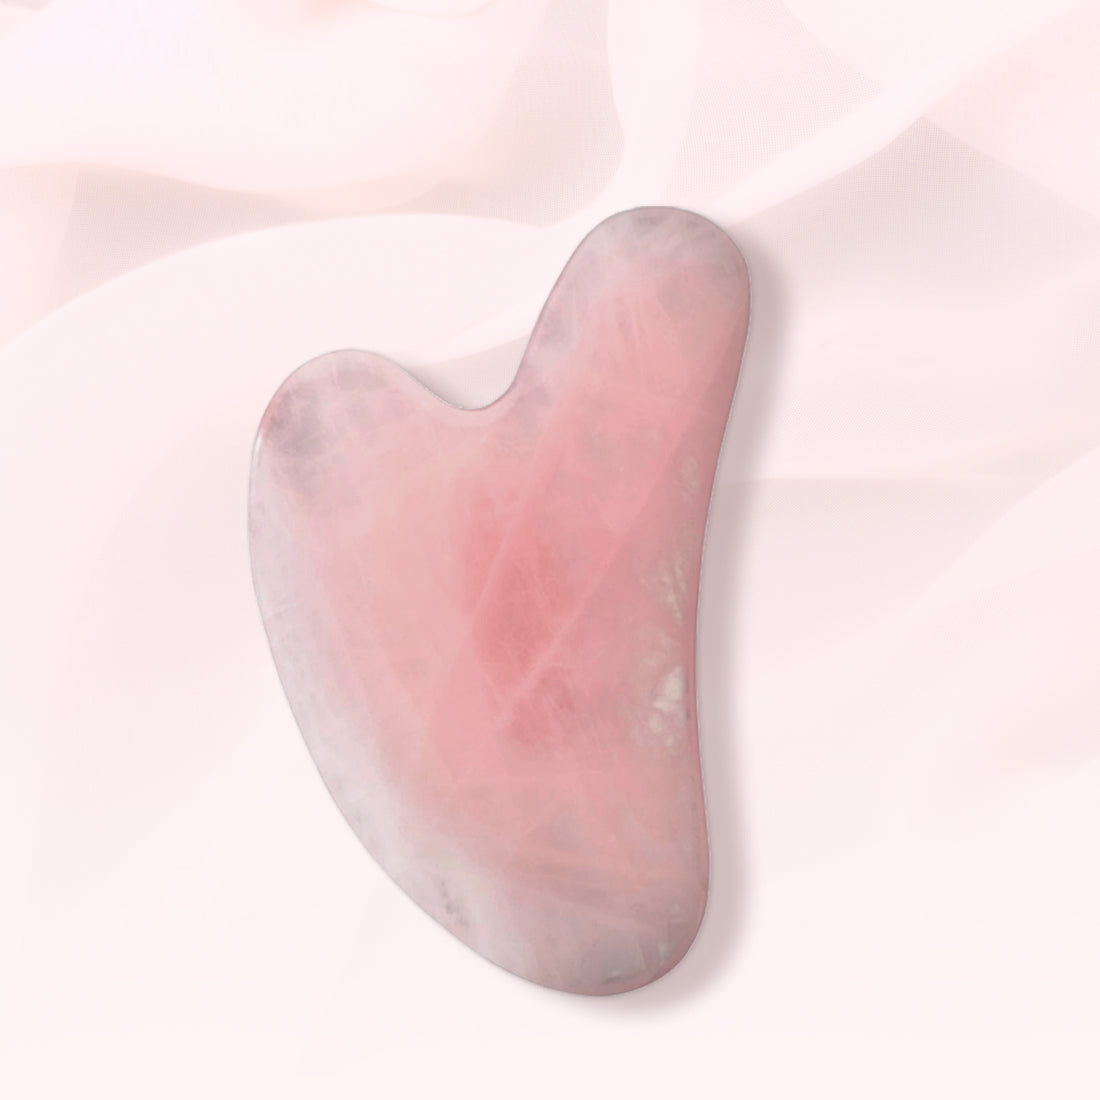 Rose Quartz Facial Uplifter - RARE SkinFuel, Clean Beauty, Natural, beauty, Age Delaying, Skincare, skincare lover